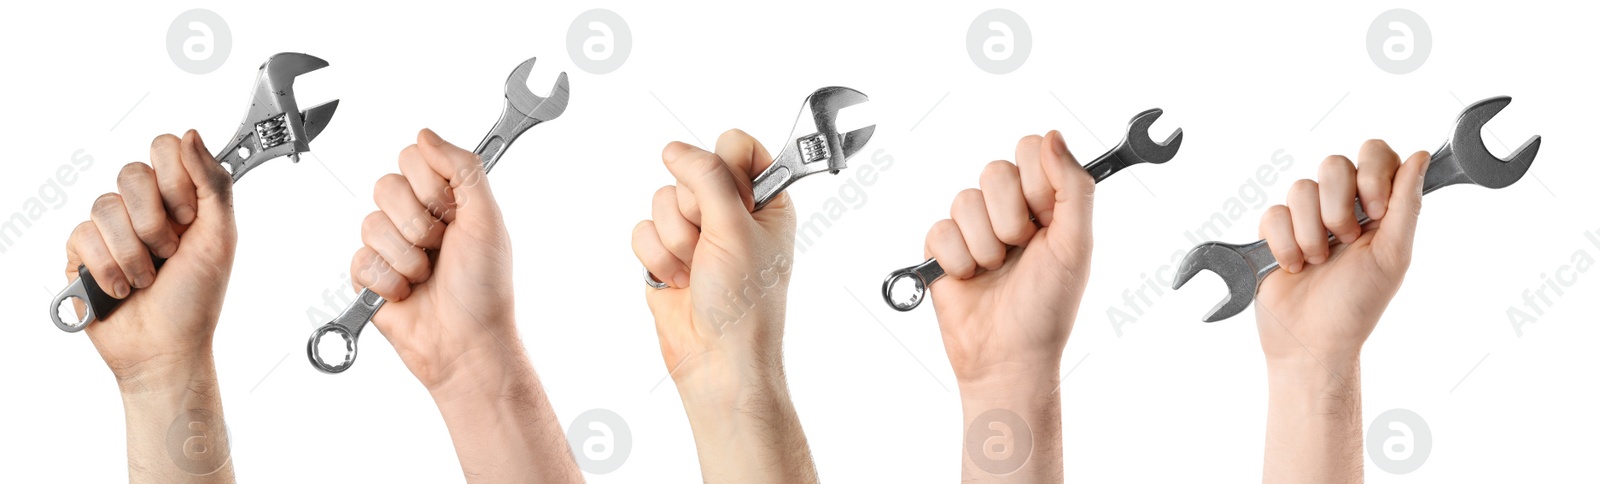 Image of Collage with photos of plumbers holding wrenches on white background. Banner design